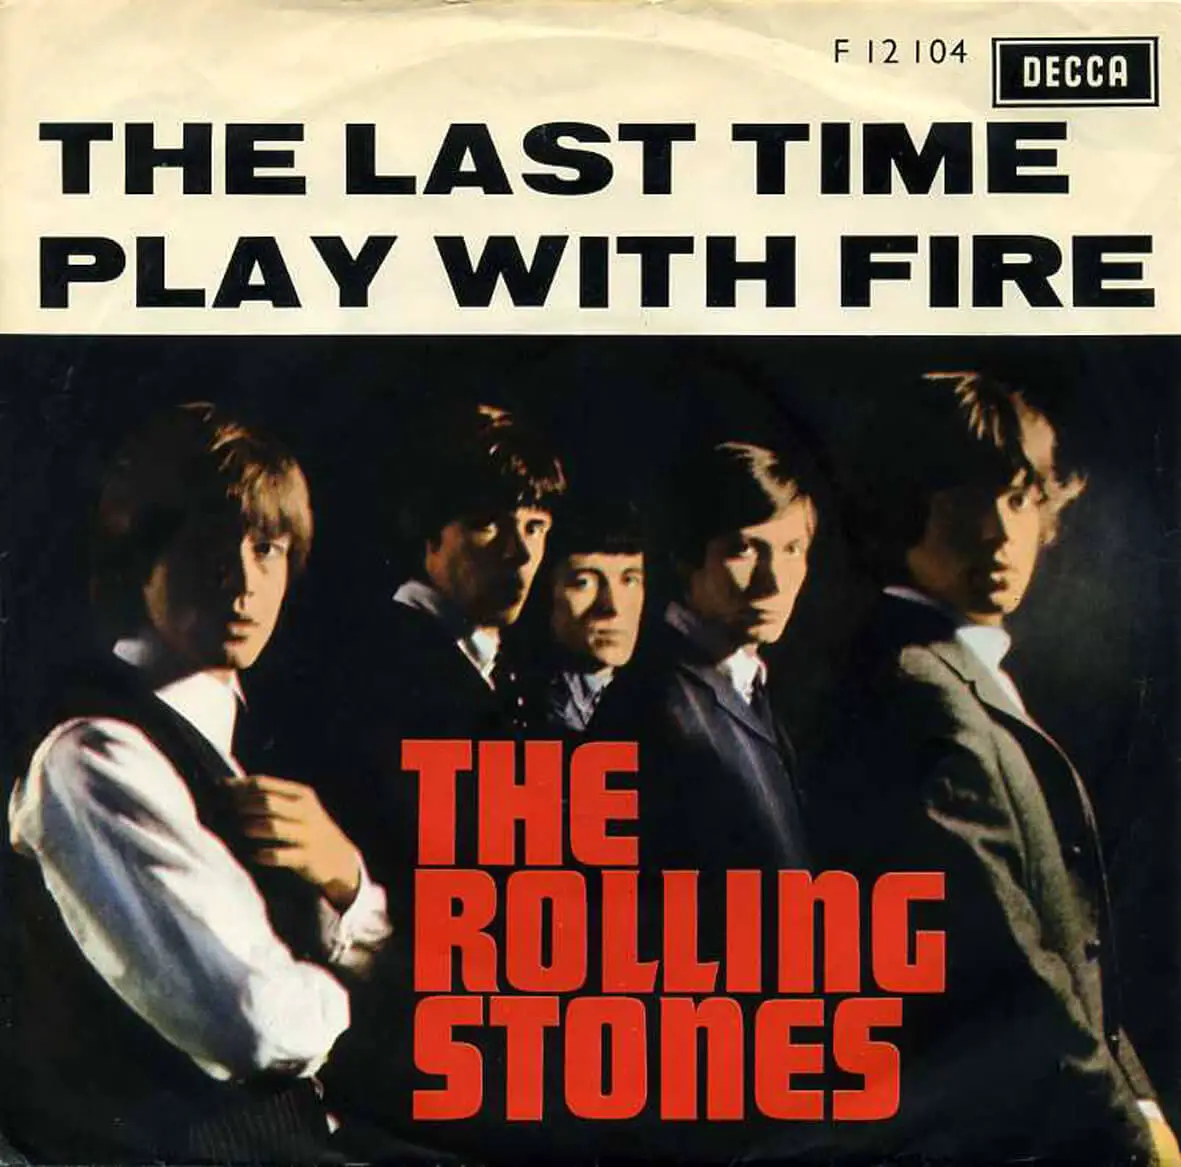 Rolling stones song stoned. Роллинг стоунз Play with Fire. Playing with Fire обложка. Rolling Stones игра. Роллинг стоунз игра с огнем.